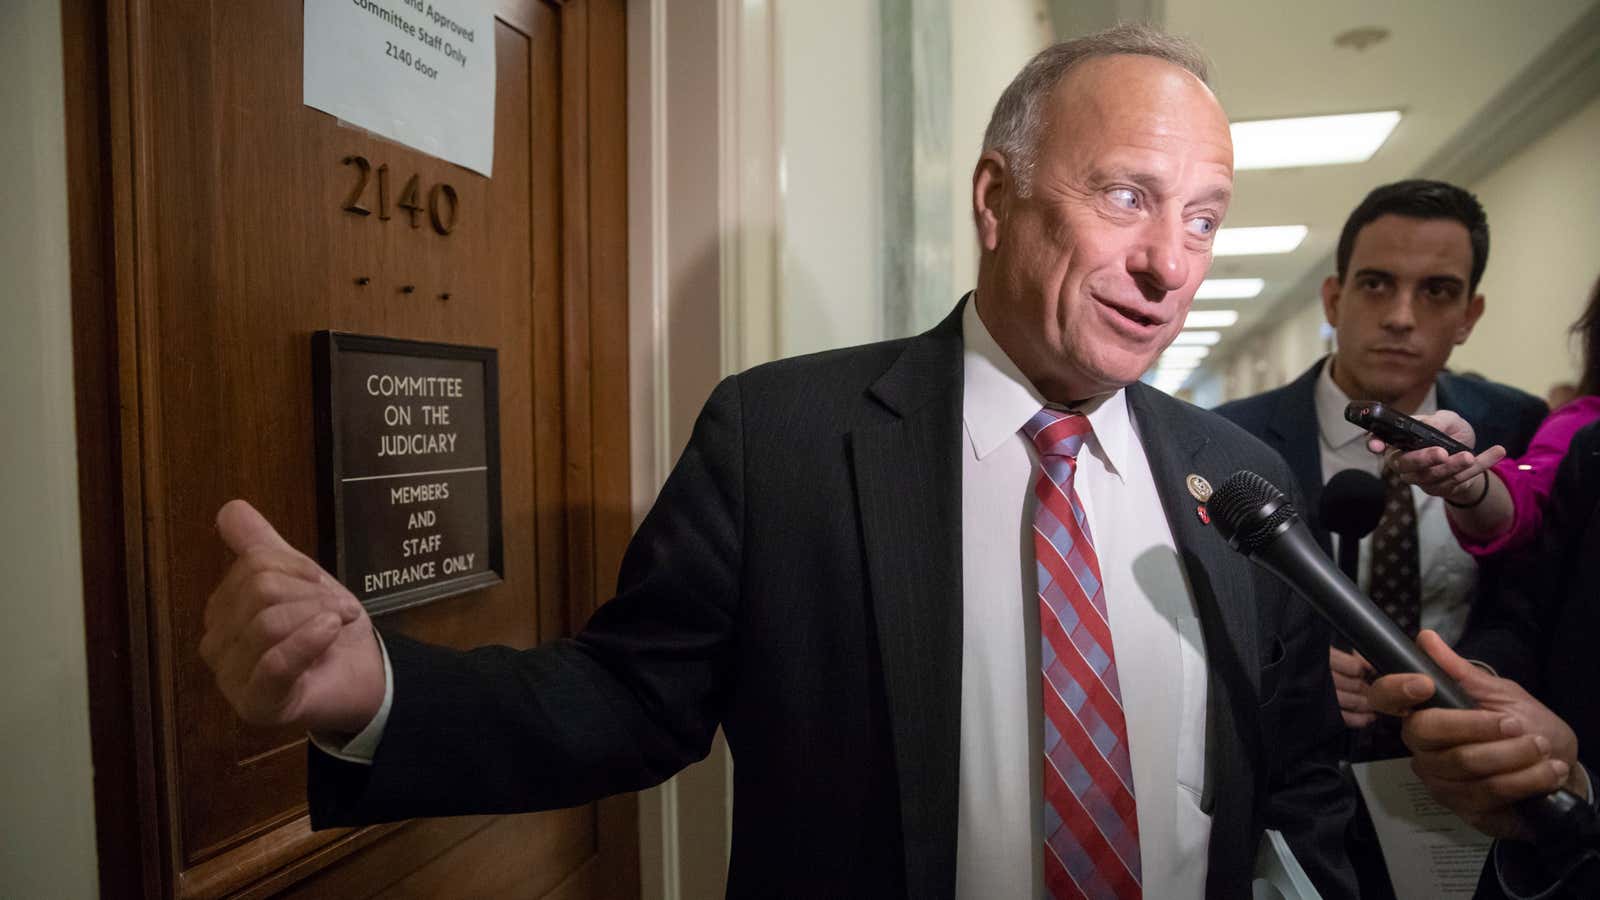 Steve King is seen as the most anti-immigrant member of Congress.